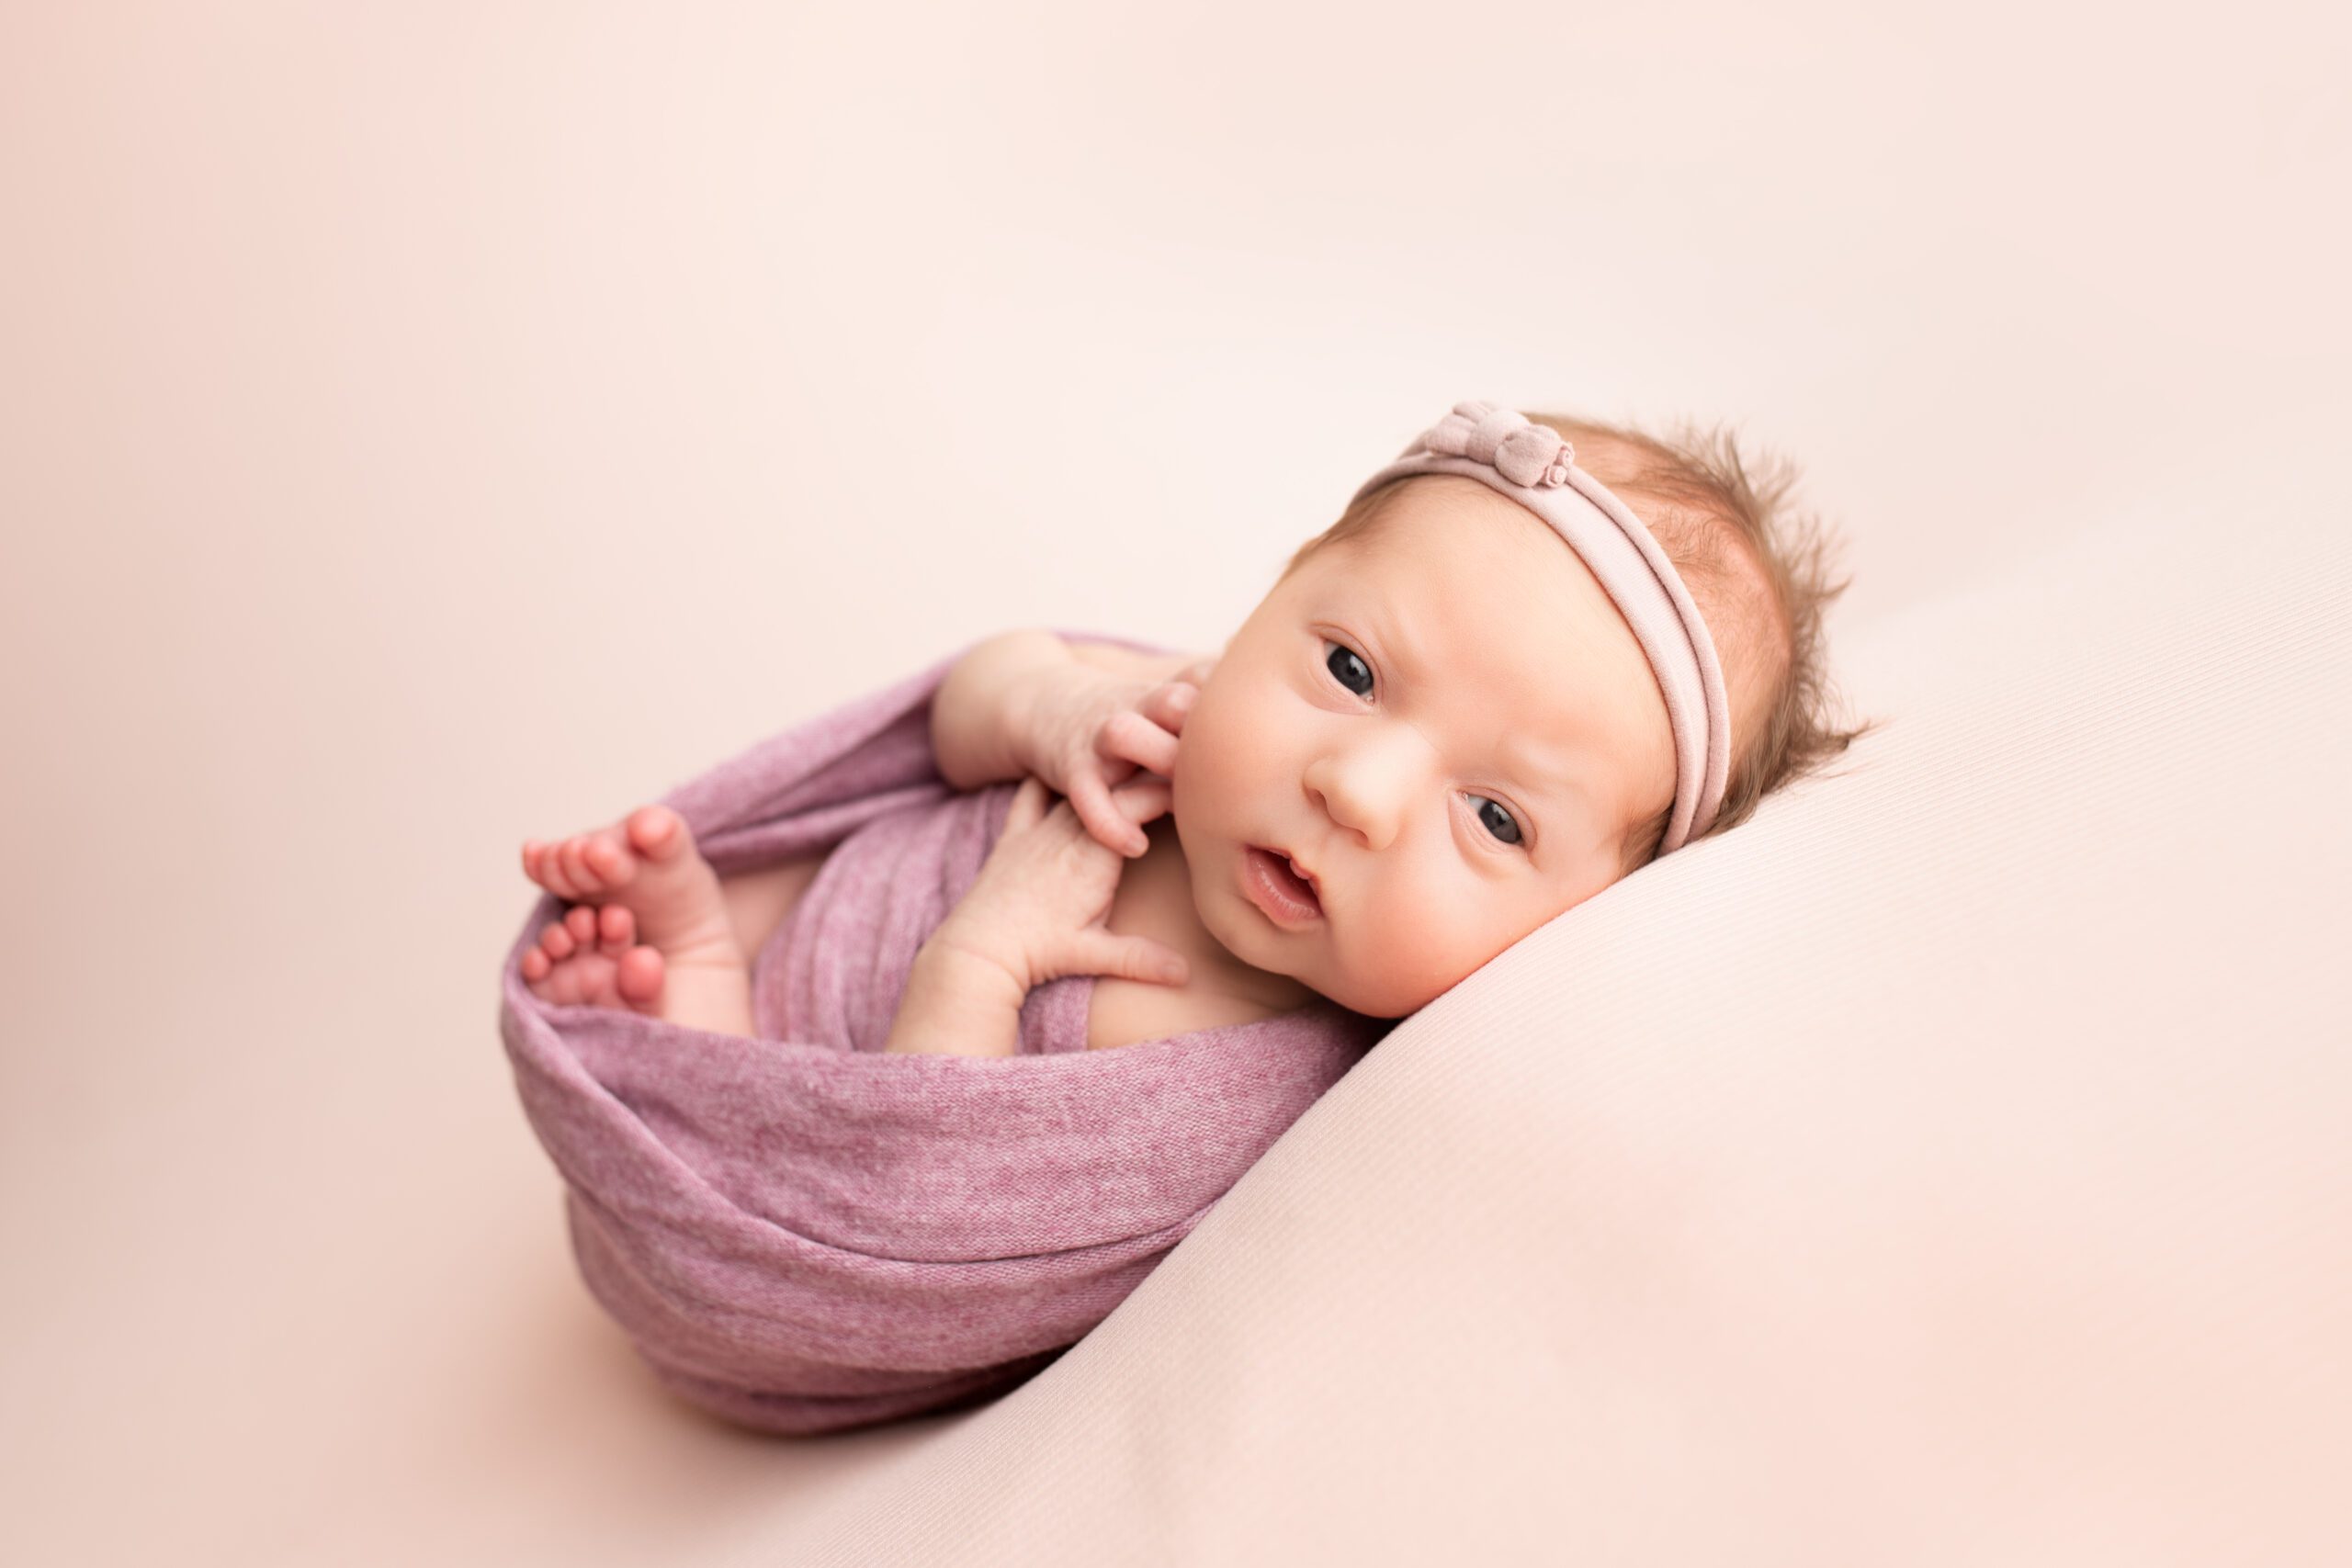 newborn baby girl in milwaukee photo studio she's wrapped in a purple fabric with her hands and toes sticking out. she has a light purple headband on with a small bow. she's laying on her back onto of light pink fabric, and she has her eyes open looking at the camera.
